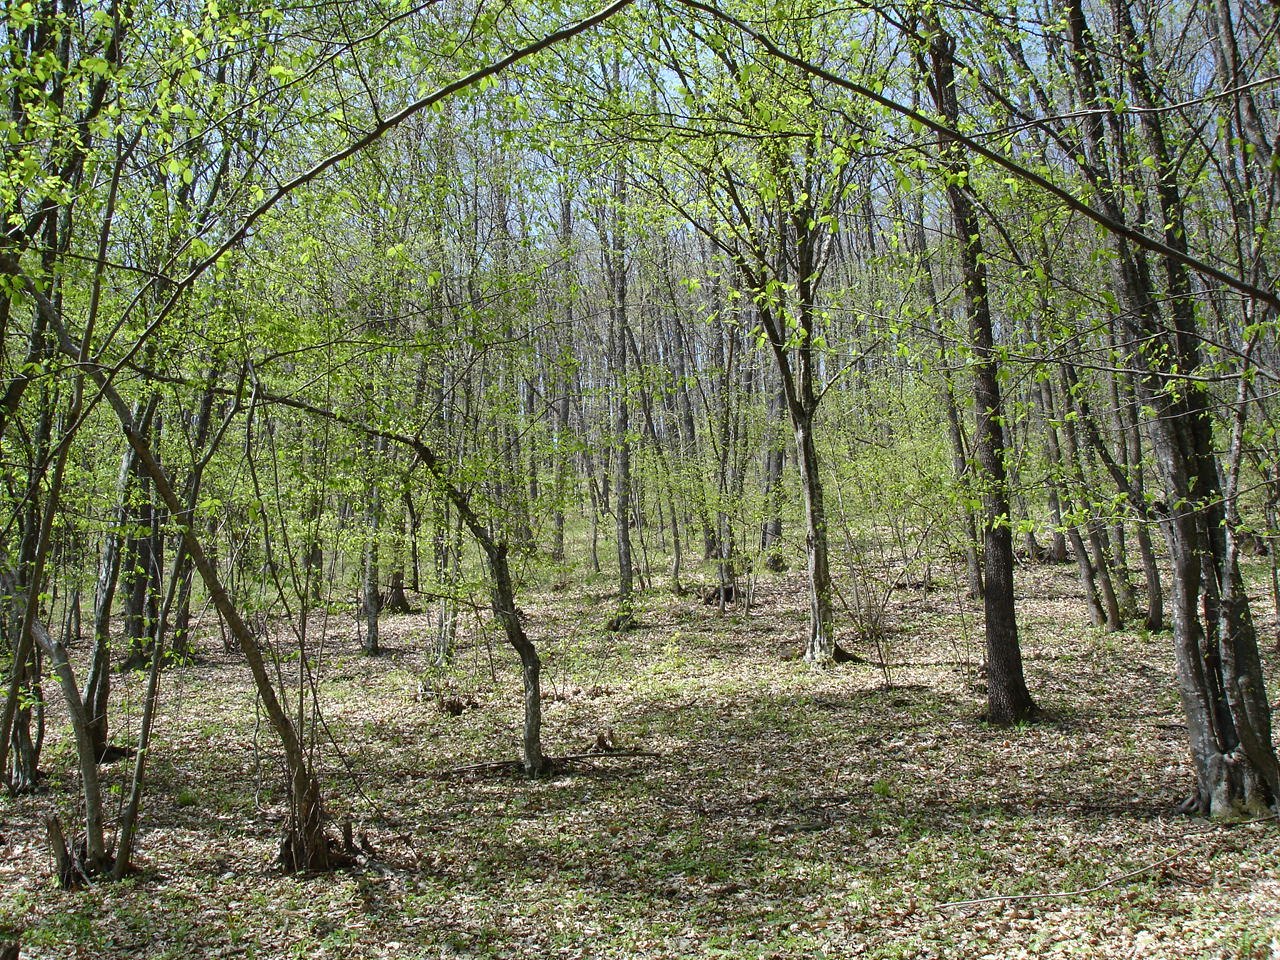 there is an image of a wooded area